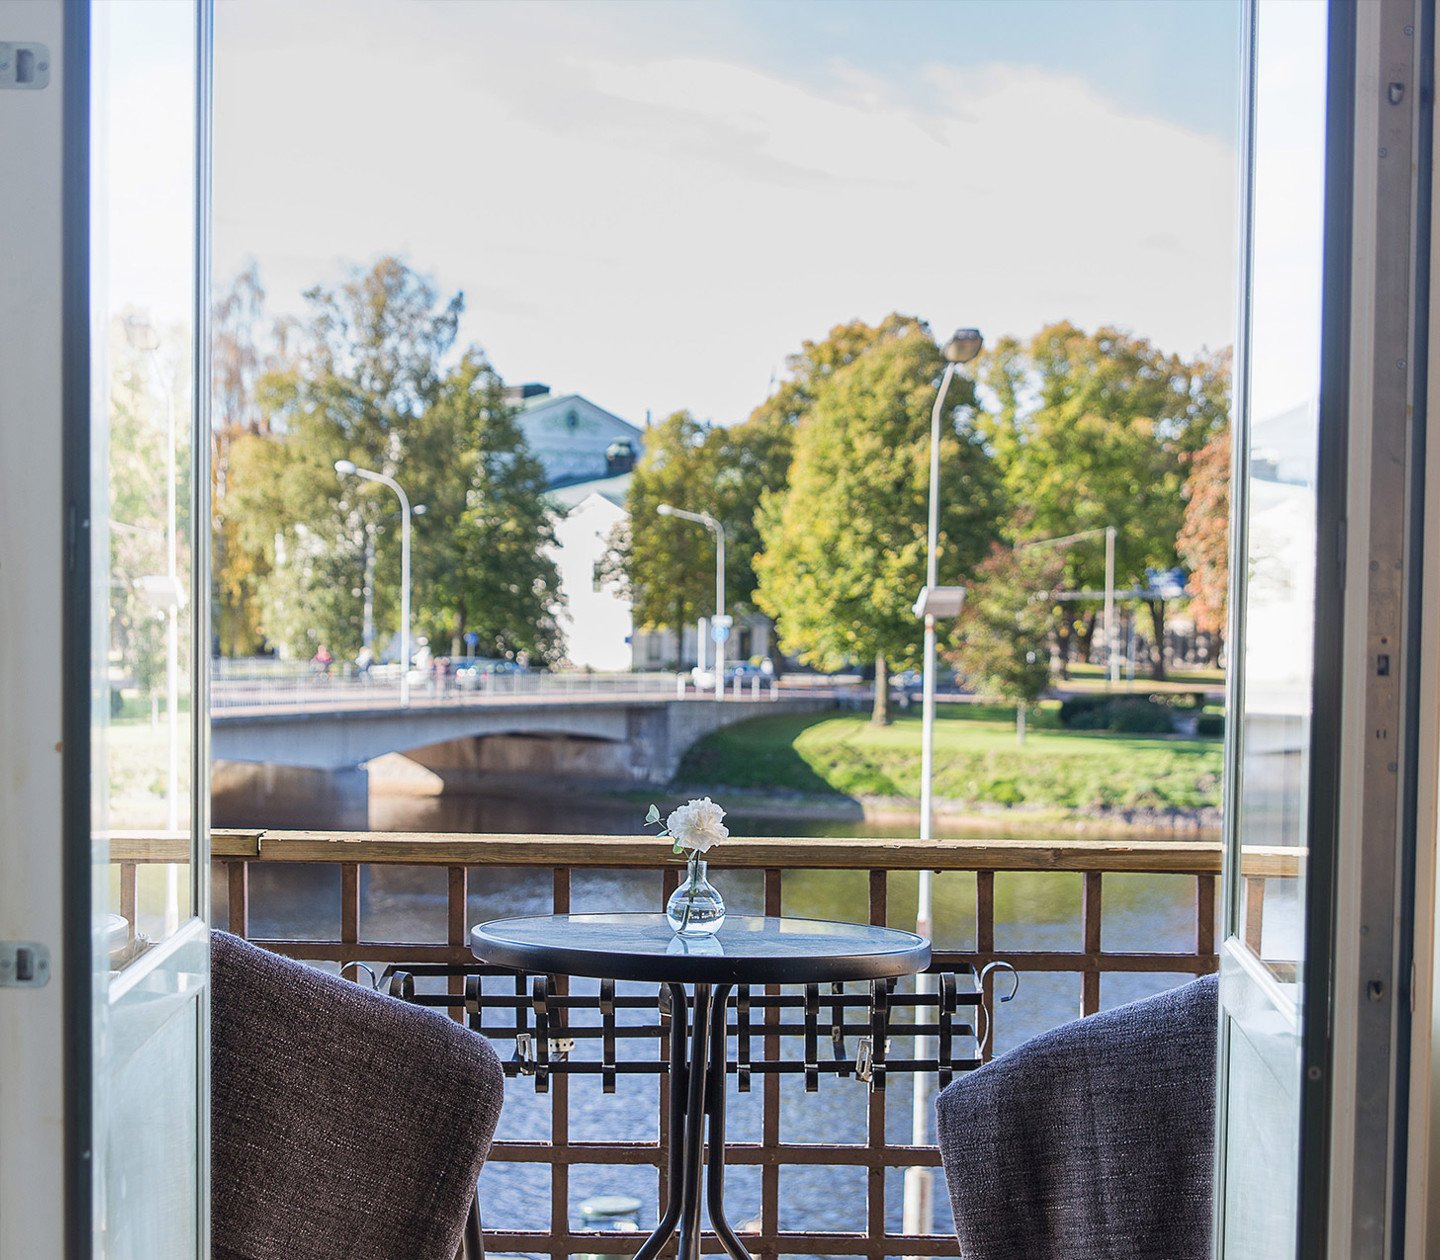 View from a window at Elite Hotels Karlstad